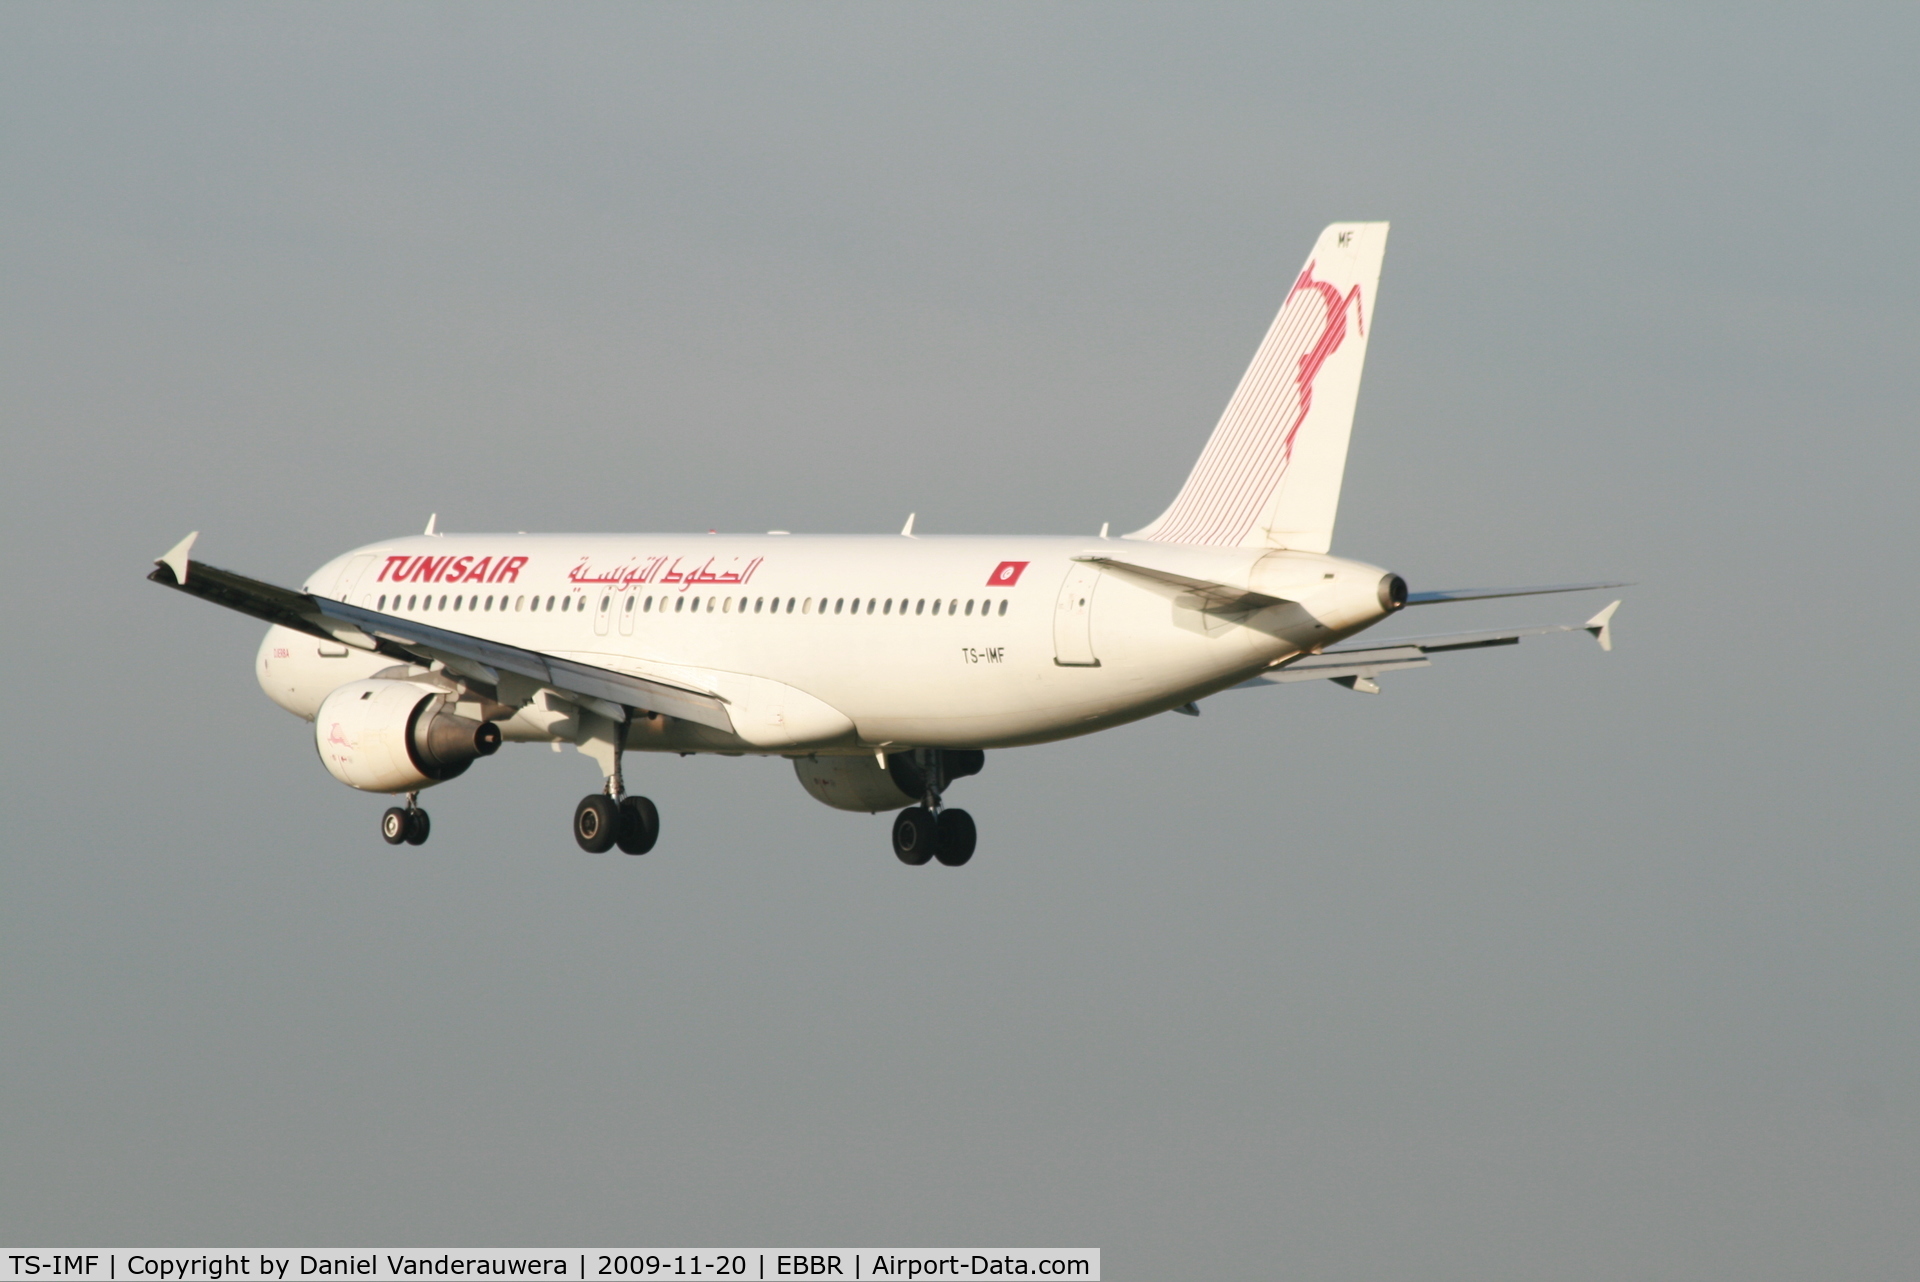 TS-IMF, 1992 Airbus A320-211 C/N 0370, Several seconds before landing on RWY 25L